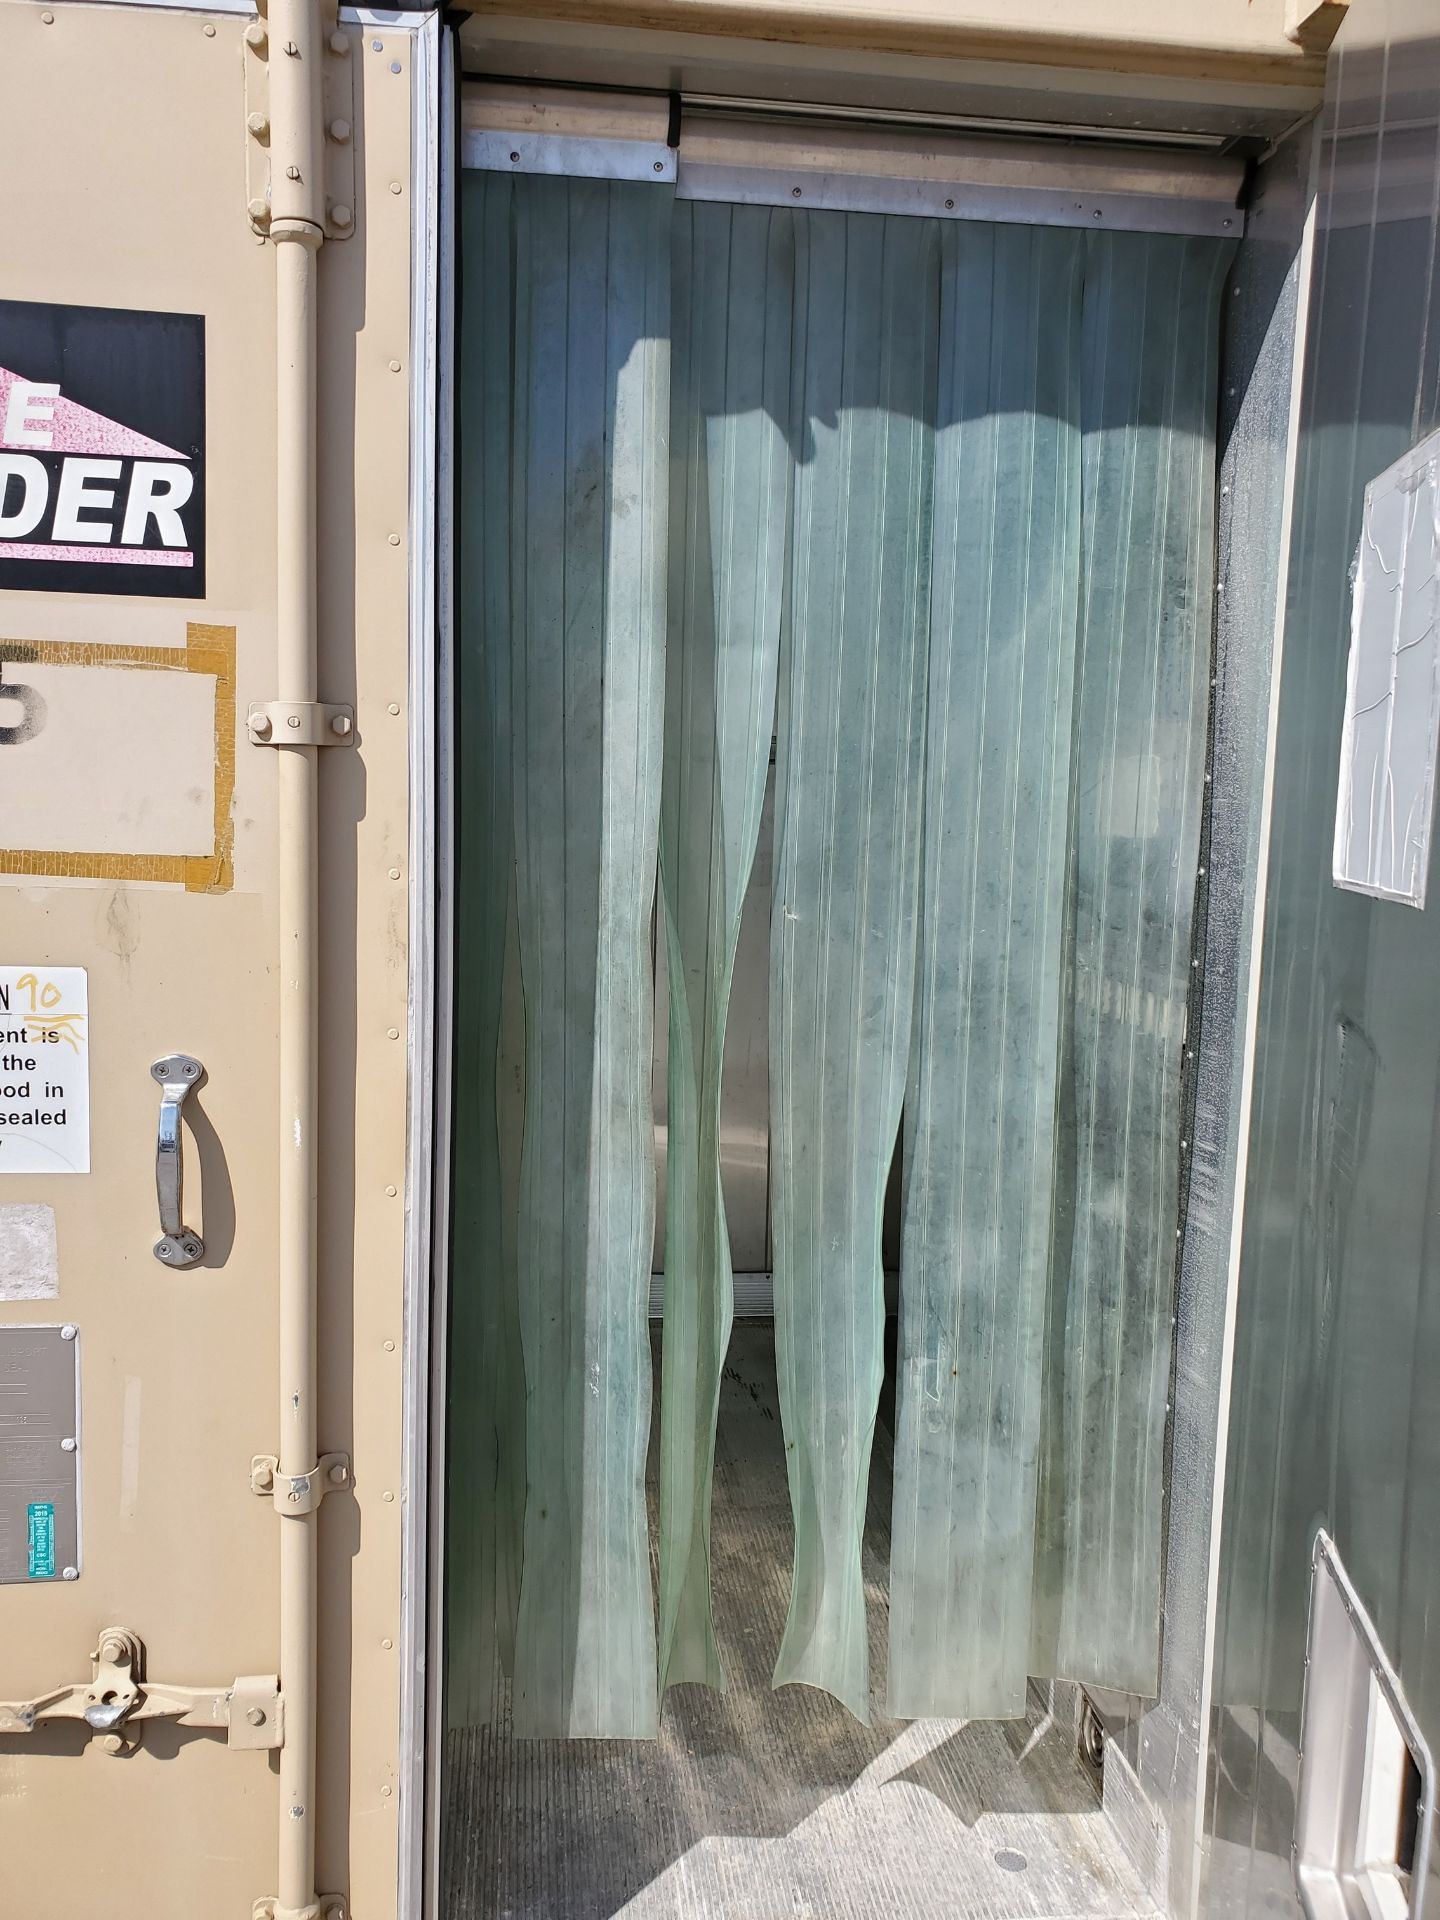 2009 FORCE PROVIDER REFRIGERATED CONTAINER 8' X 8' X 6.5', LESS THAN 200 HOURS - Image 7 of 11